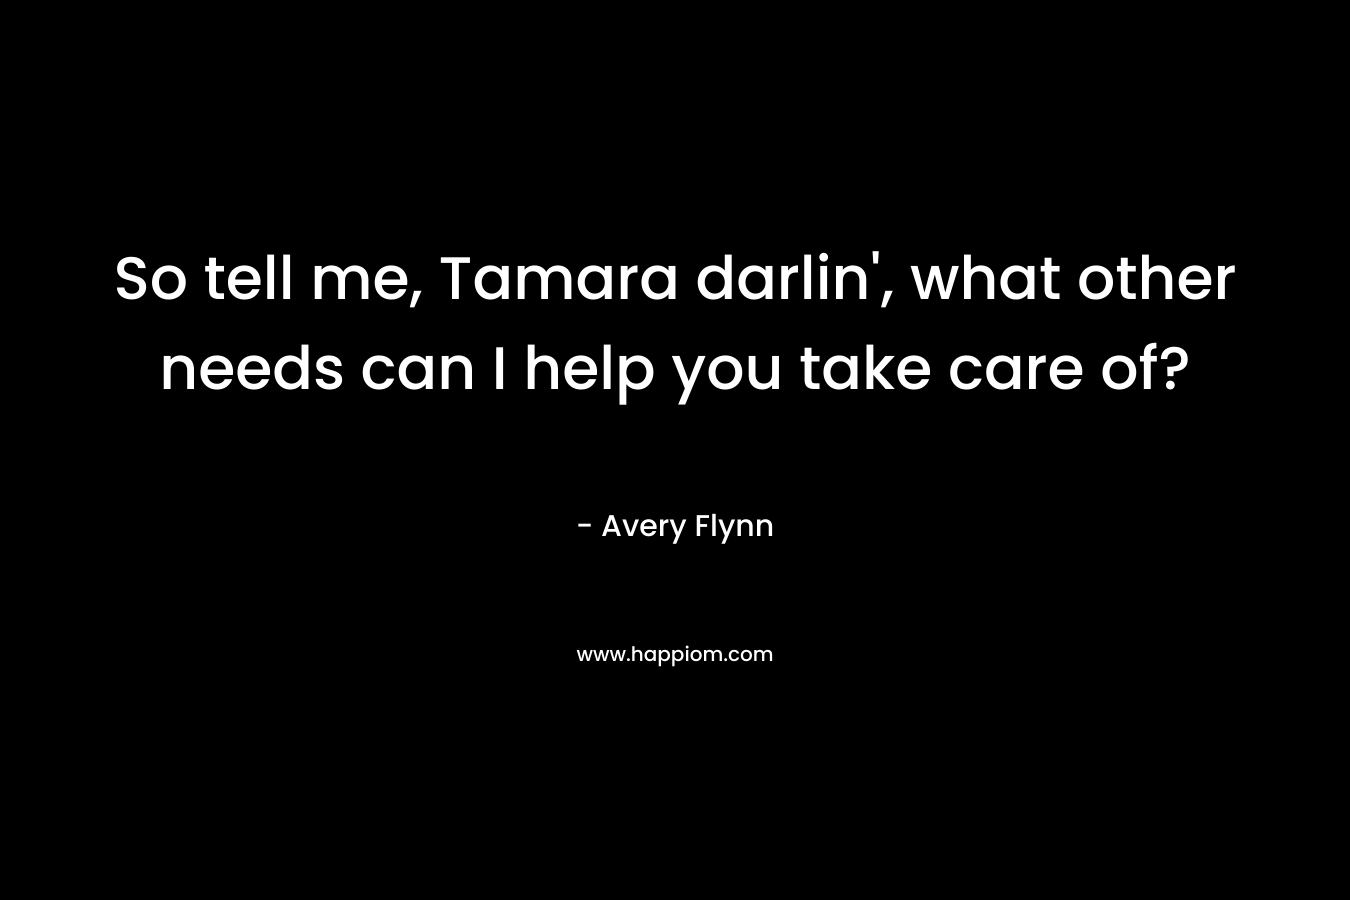 So tell me, Tamara darlin', what other needs can I help you take care of?